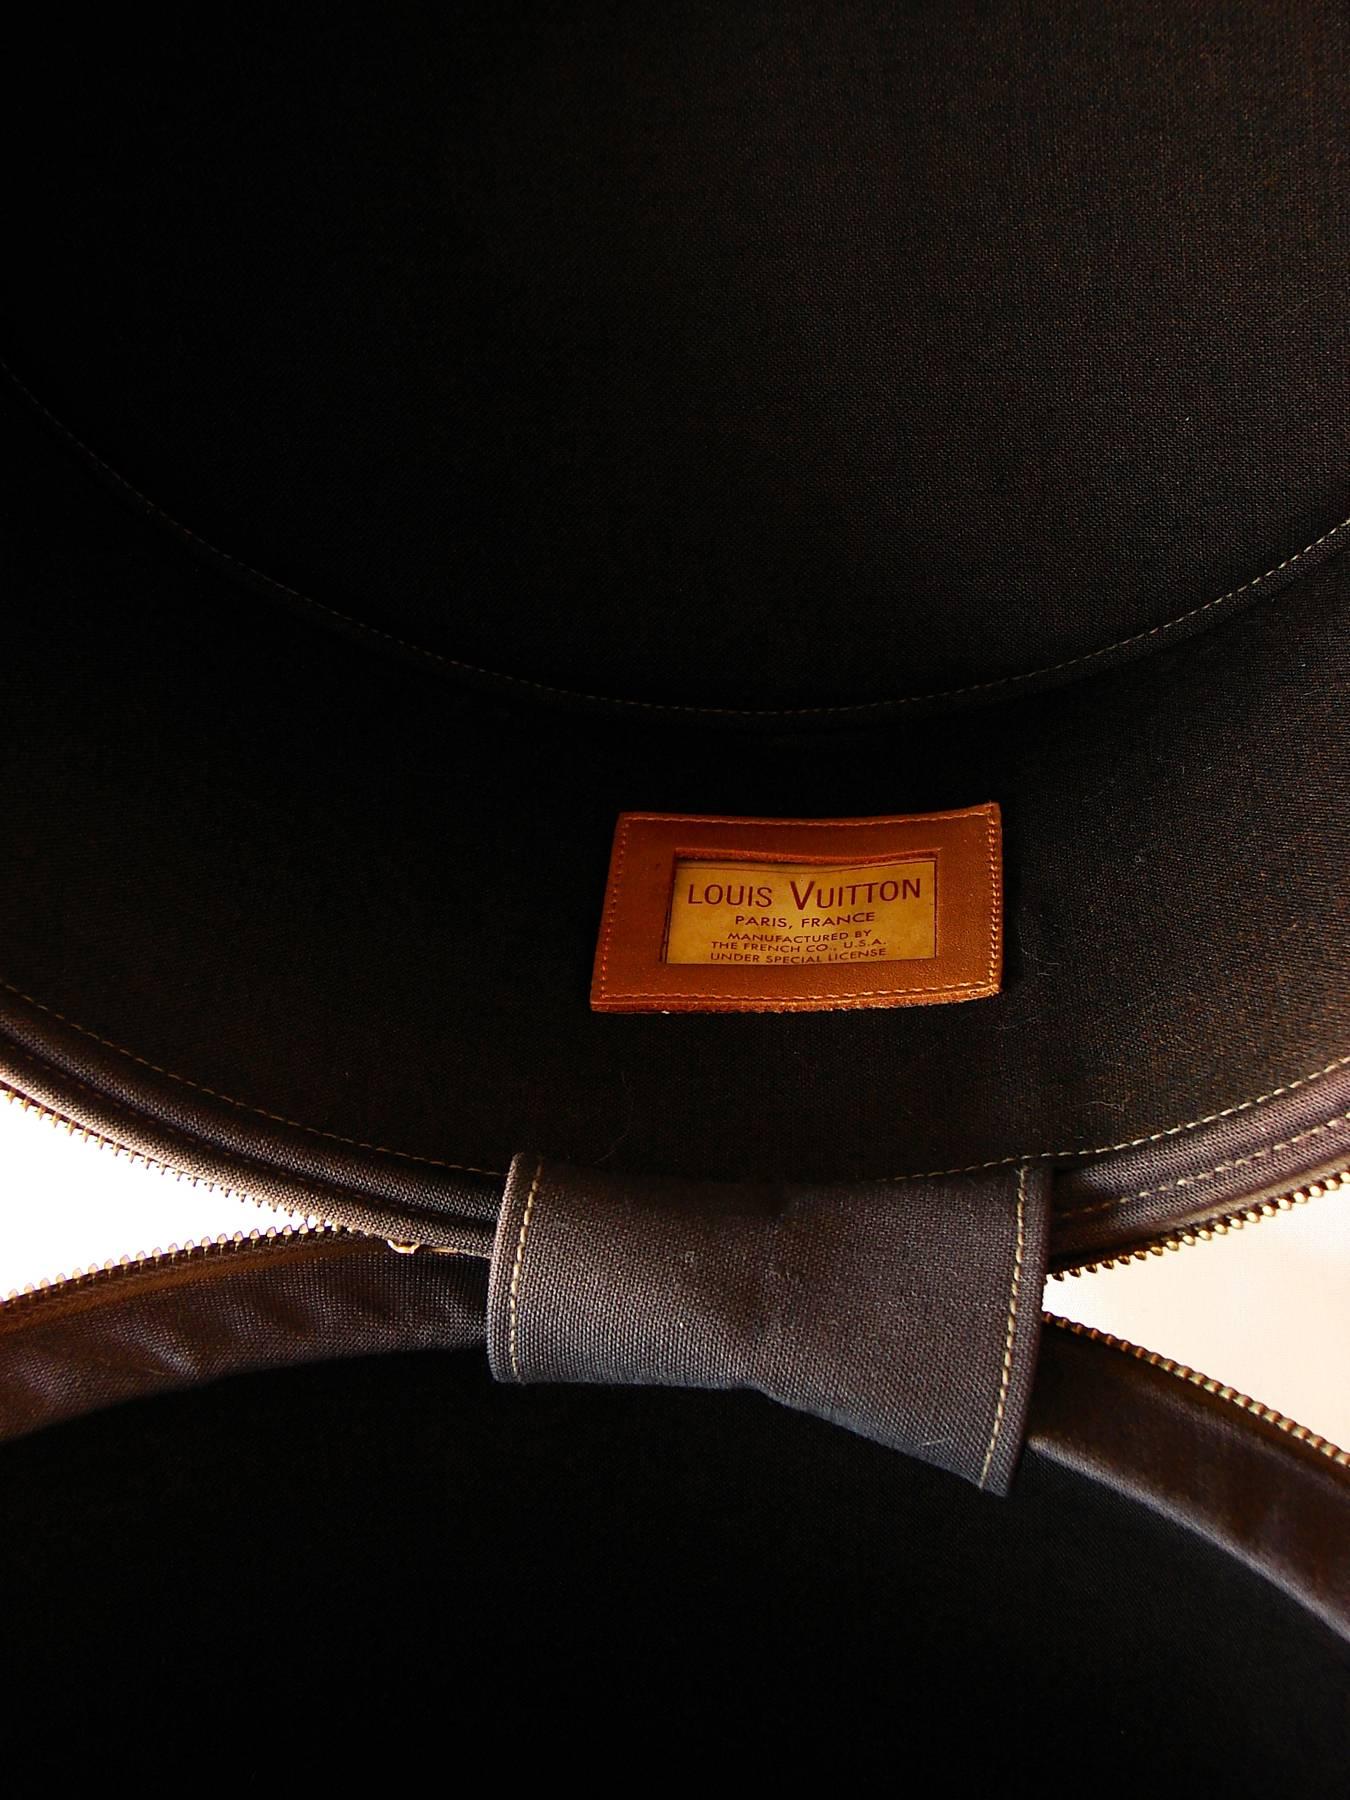 Louis Vuitton Monogram Large Hat or Wig Box by The French Company 1970s  2